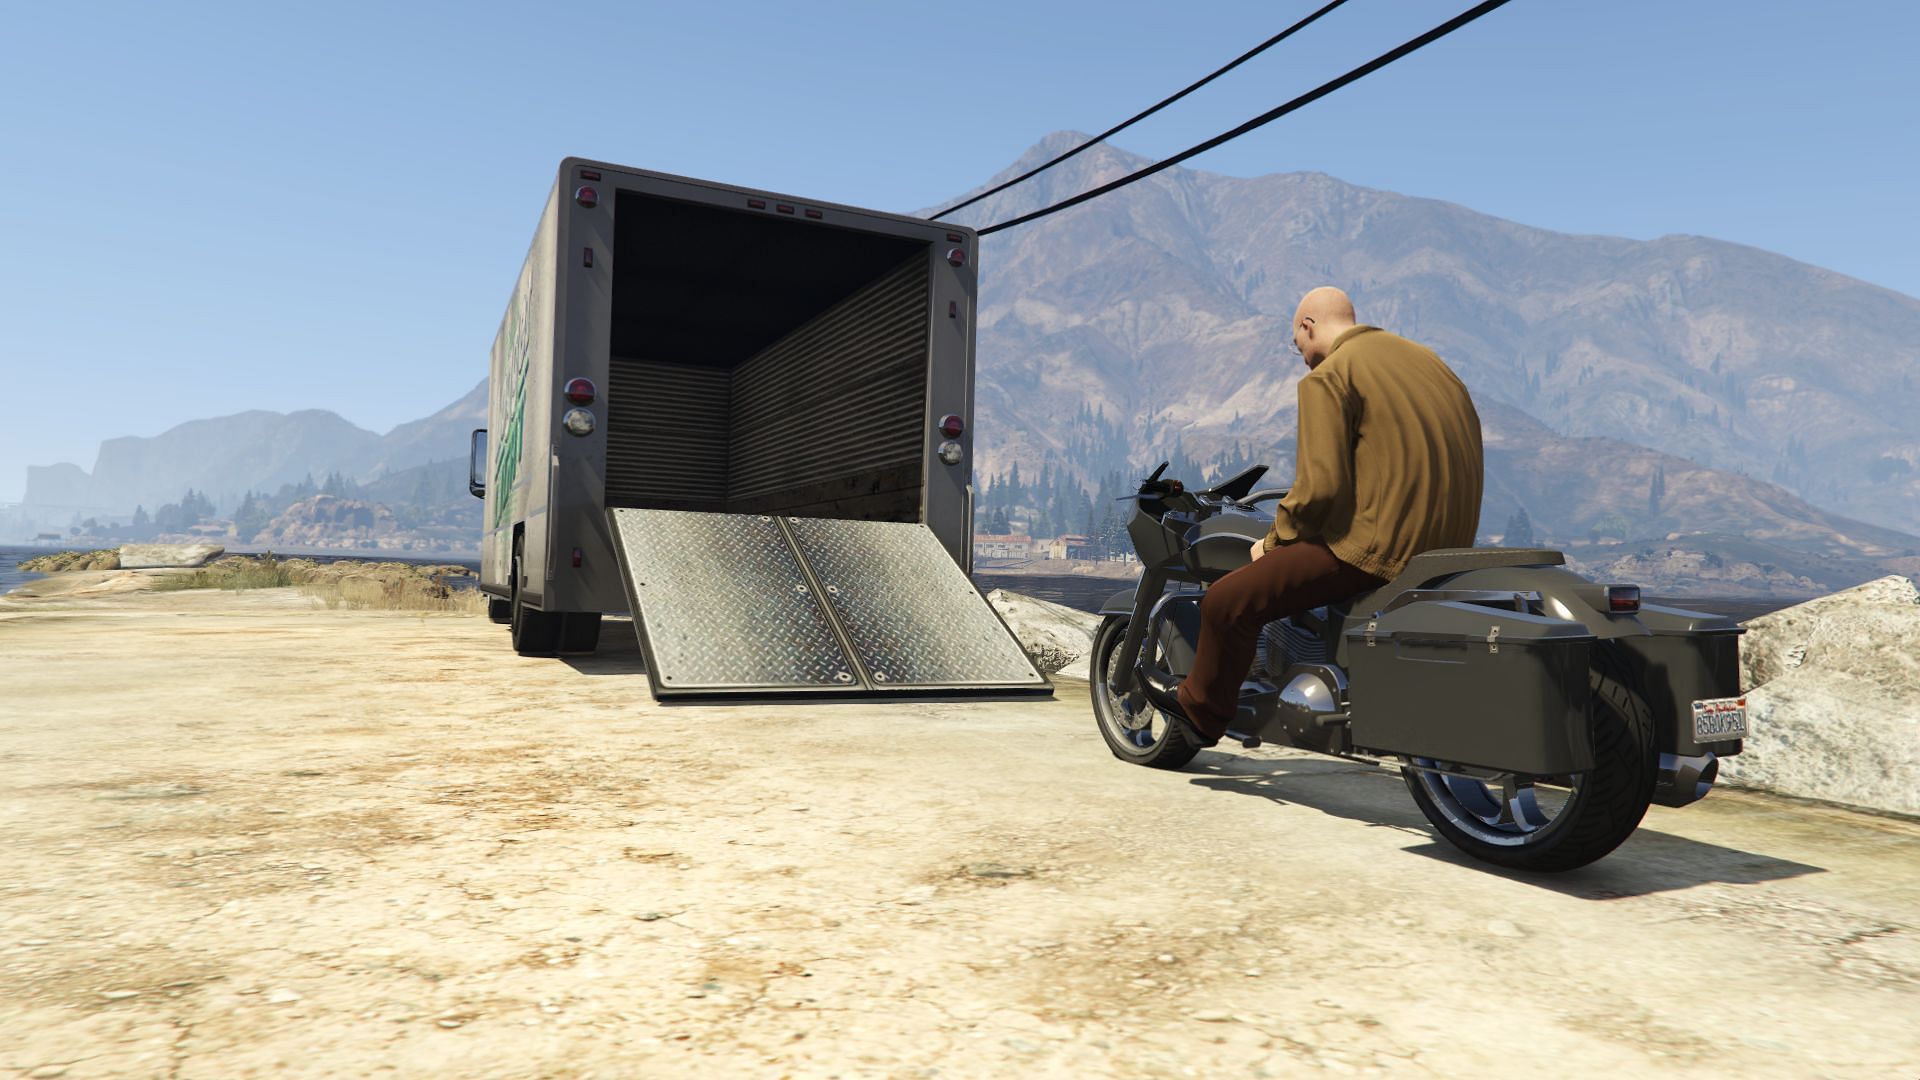 Sell Missions are a good way to make extra money in GTA Online (Image via Rockstar Games)